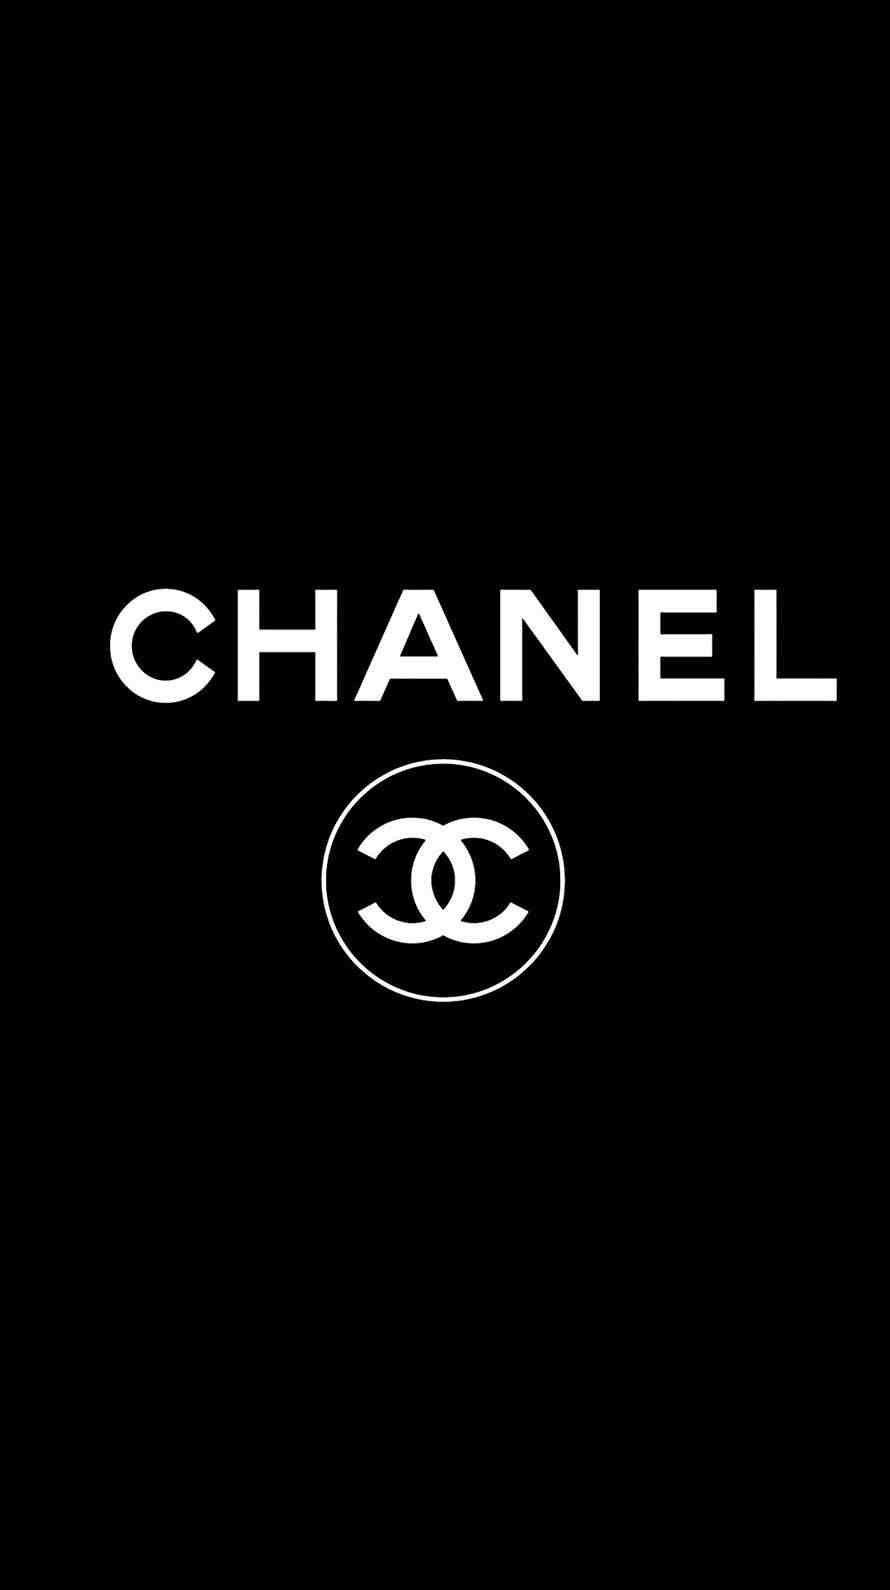 Chanel Wallpaper for iPhone 